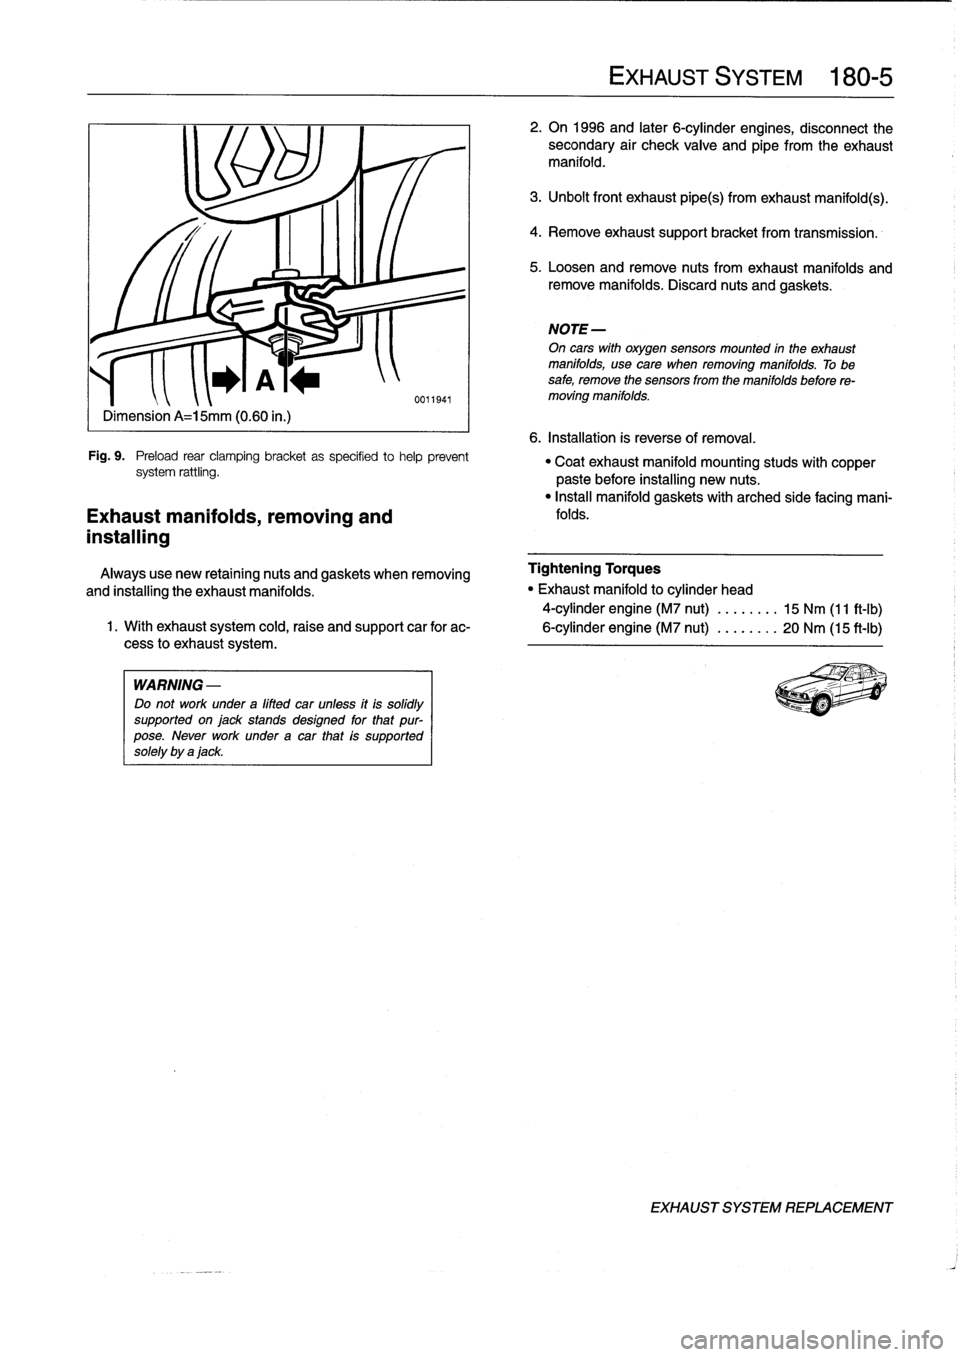 BMW 318i 1997 E36 User Guide 
Dimension
A=15mm
(0
.60
in
.)

Fig
.
9
.

	

Preload
rear
clamping
bracket
as
specifíed
tohelp
prevent
system
rattling
.

Exhaust
manifolds,
removing
and

installing

WARNING
-

Do
not
work
under
a
